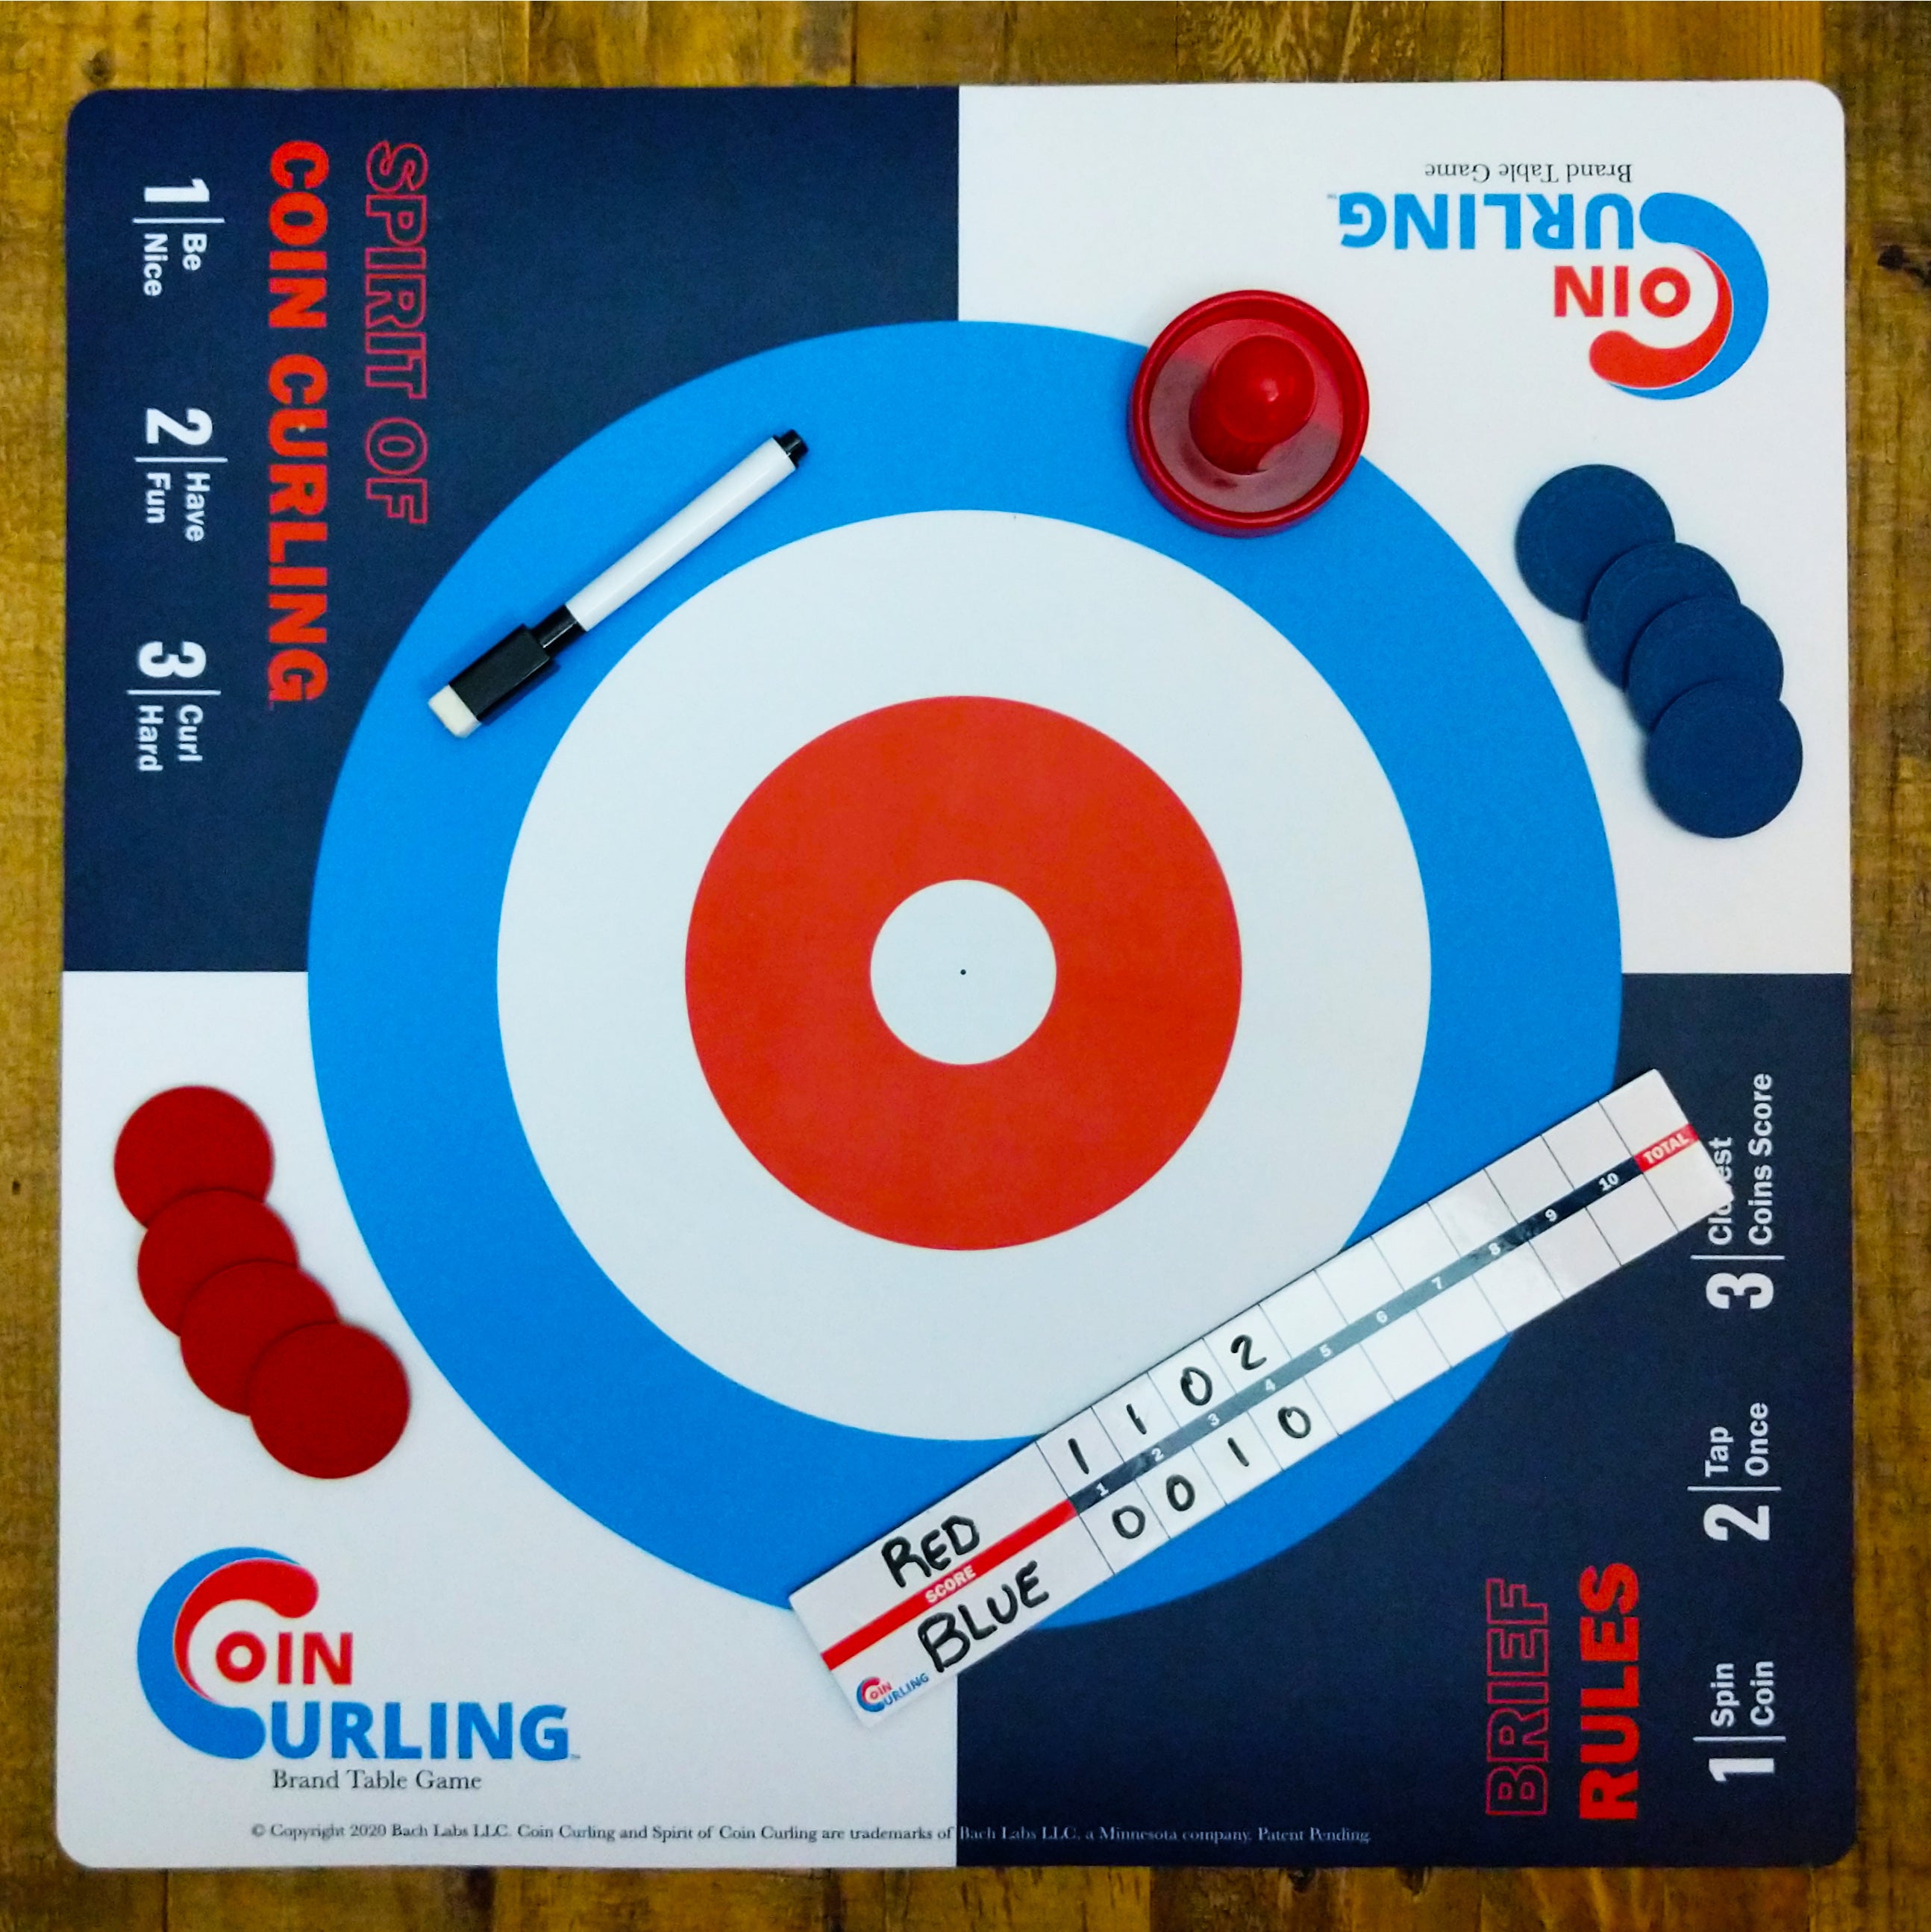 Coin Curling